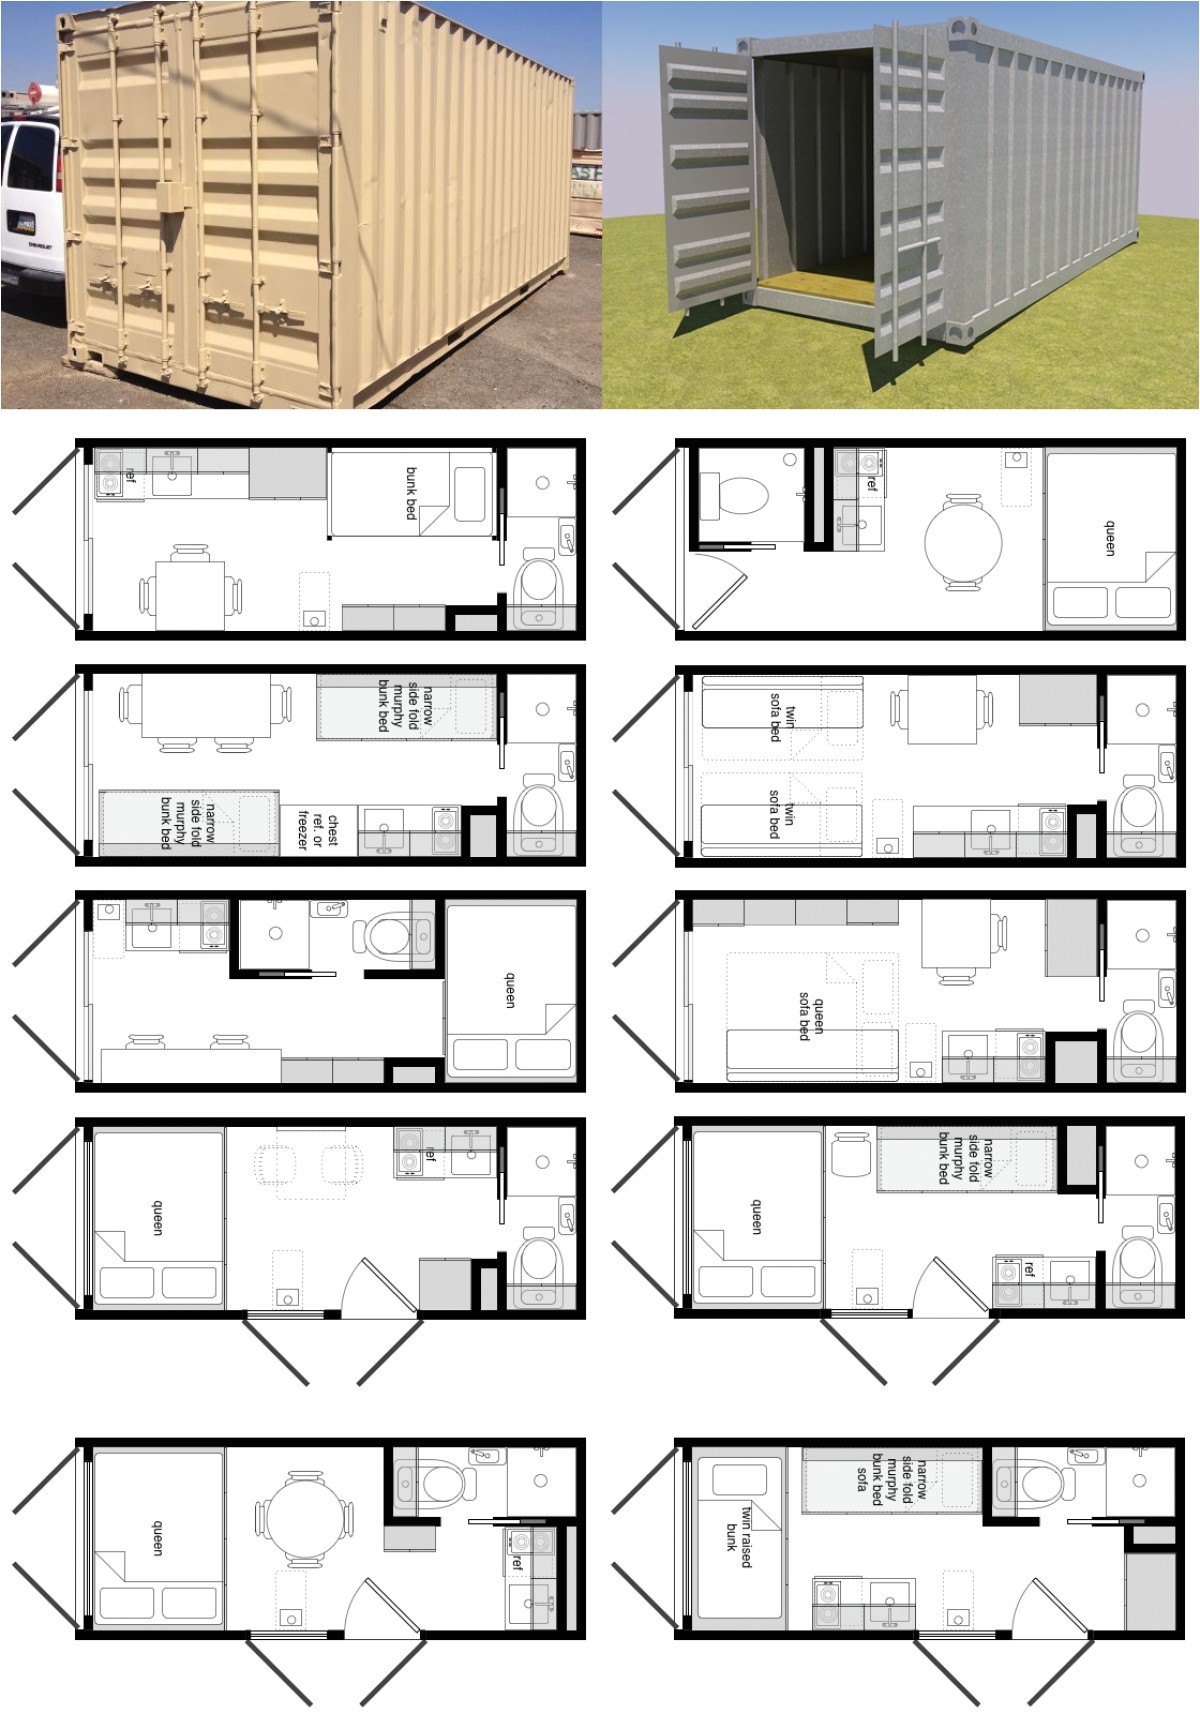 20 foot shipping container floor plan brainstorm tiny house living single shipping container homes interior